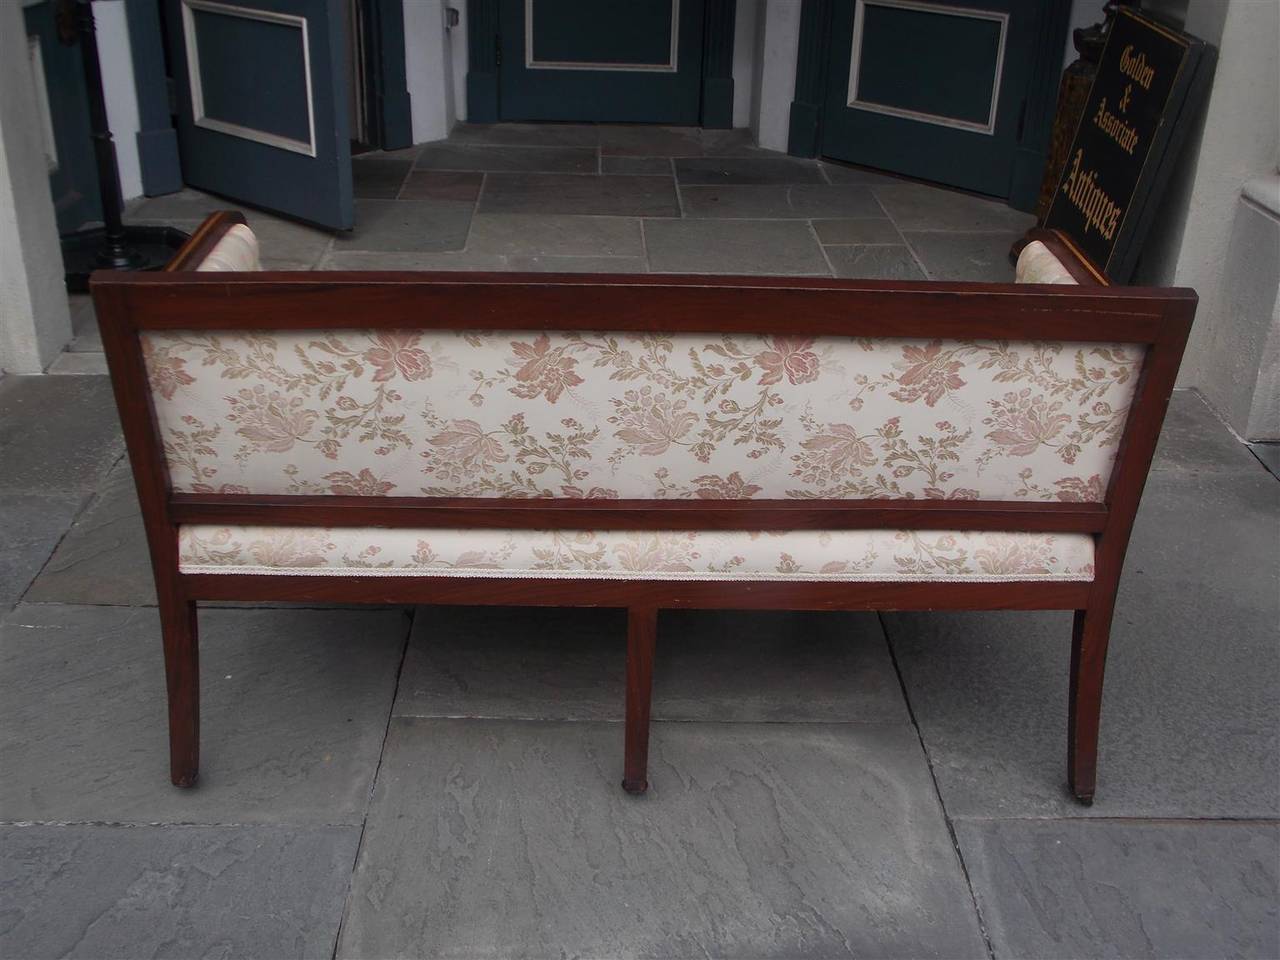 English Regency Stenciled and Gilt Tufted Upholstered Settee, Circa 1780 For Sale 3